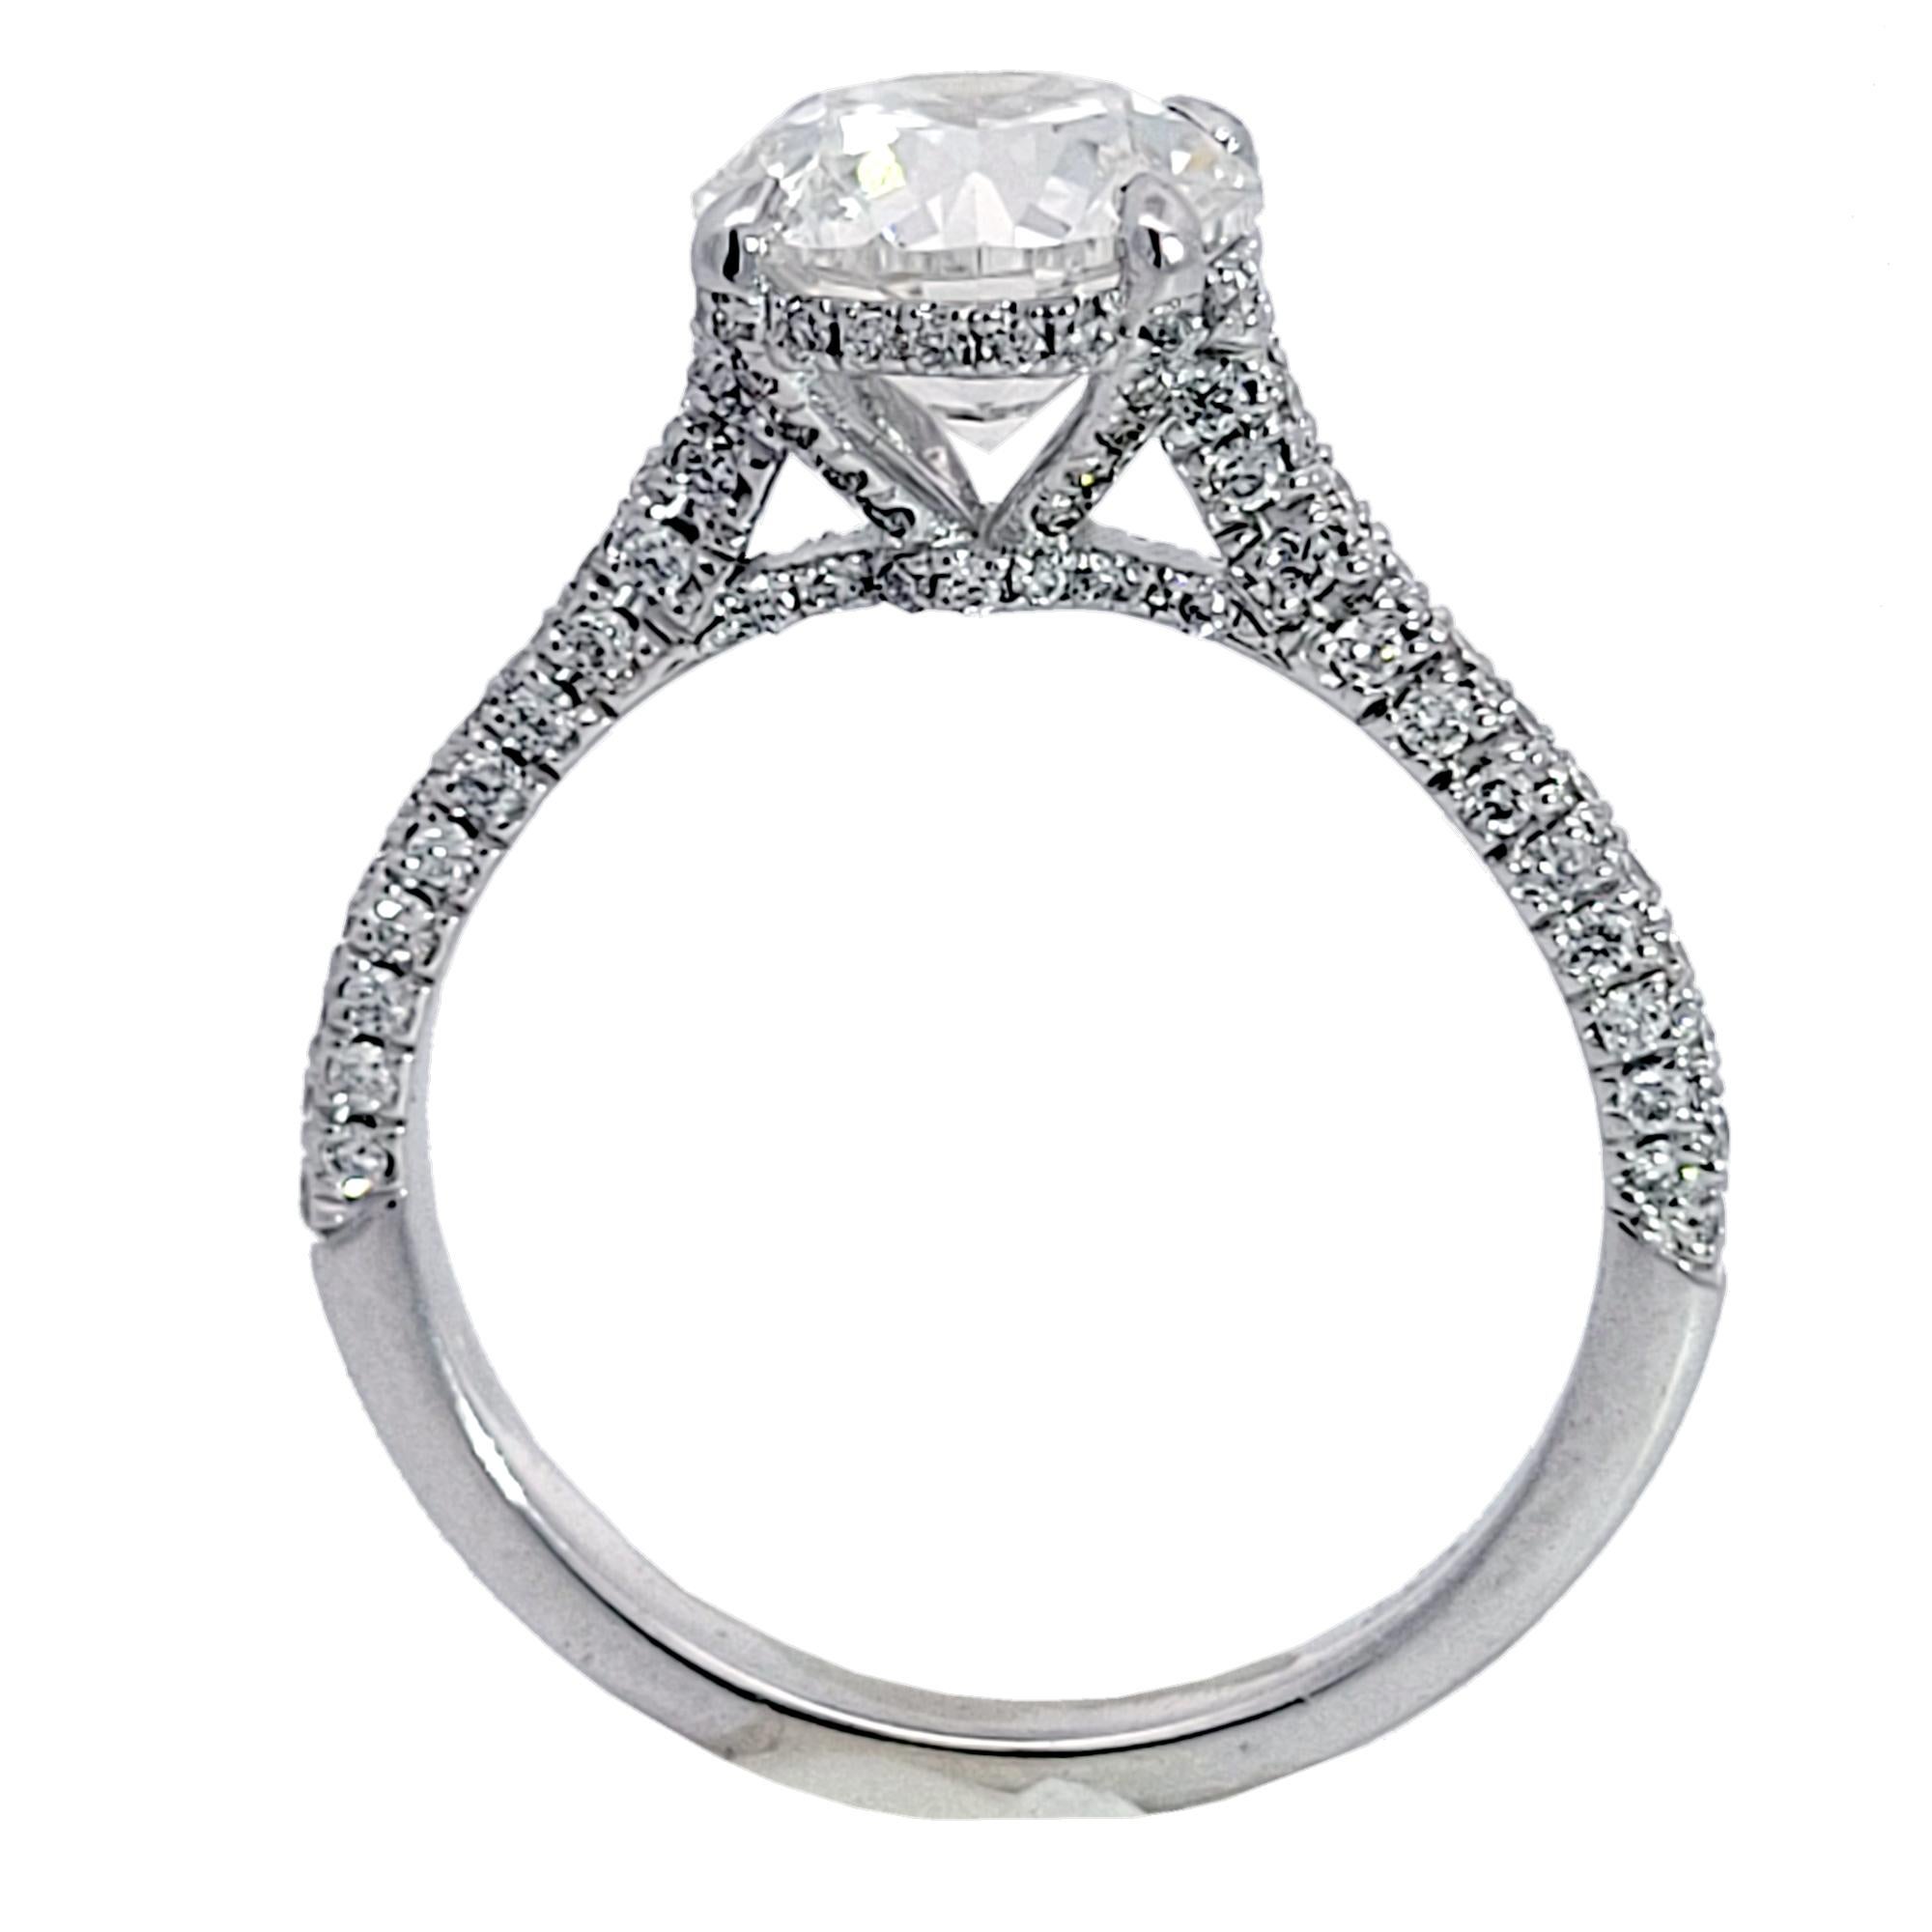 A beautiful GIA Certified 2.01 Ct Round Brilliant D/SI1 center Diamond set in a fine Pave Set 18K White Gold Engagement Ring with Hidden Halo. Total diamond weight of 0.51 Ct. diamonds on the side. Shank is pave set on all sides as well as the under